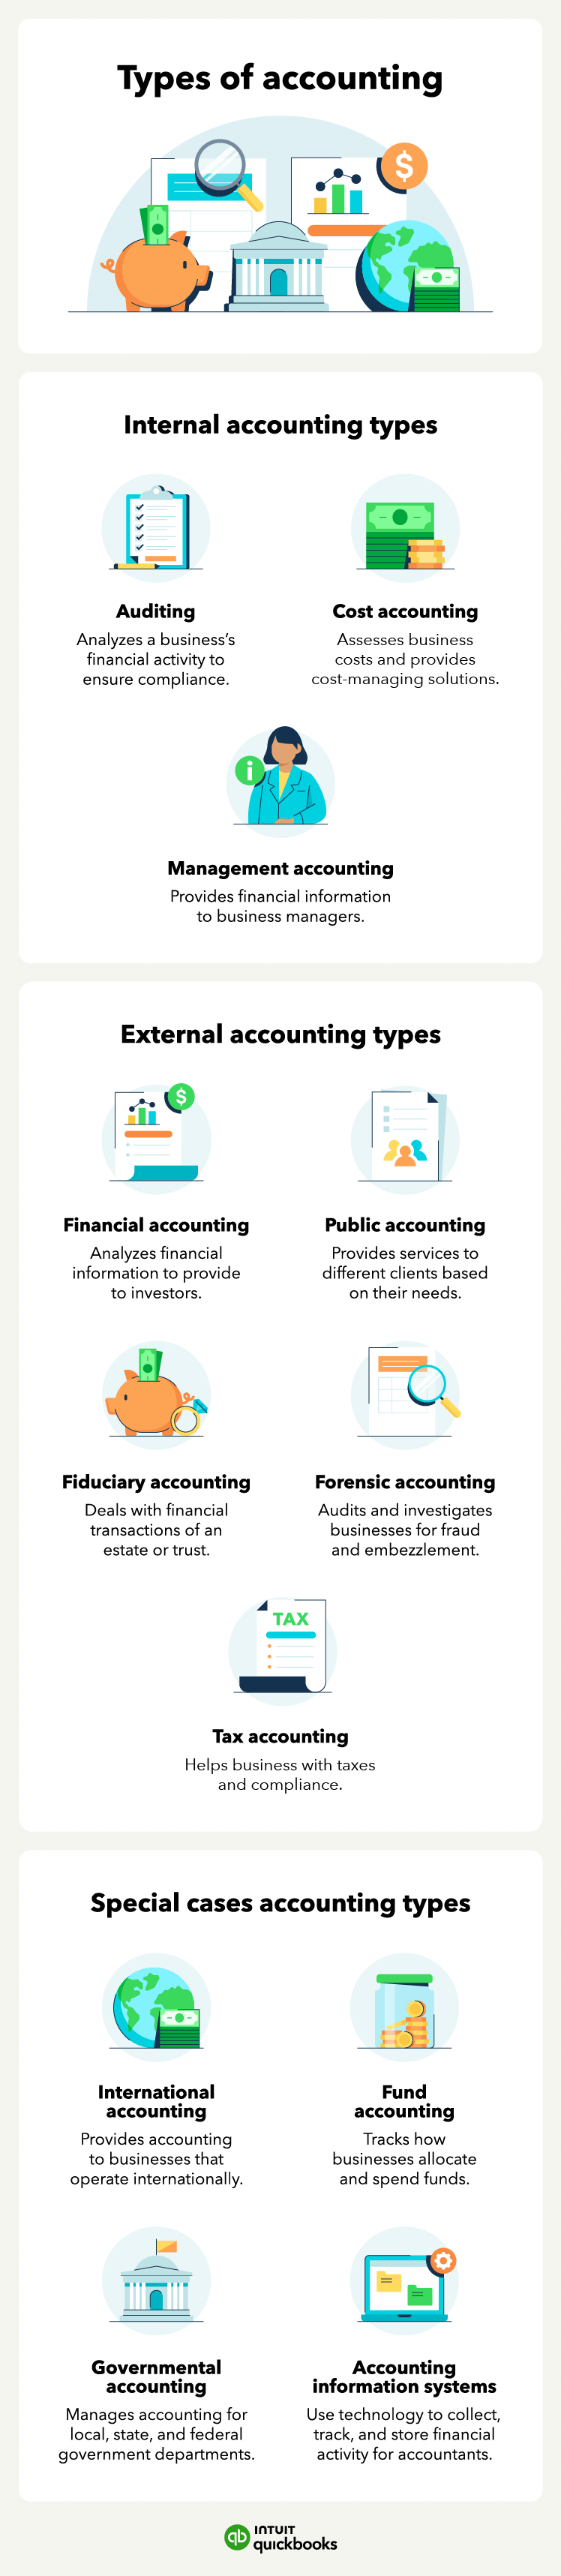 An infographic overviews the 12 different types of accounting.